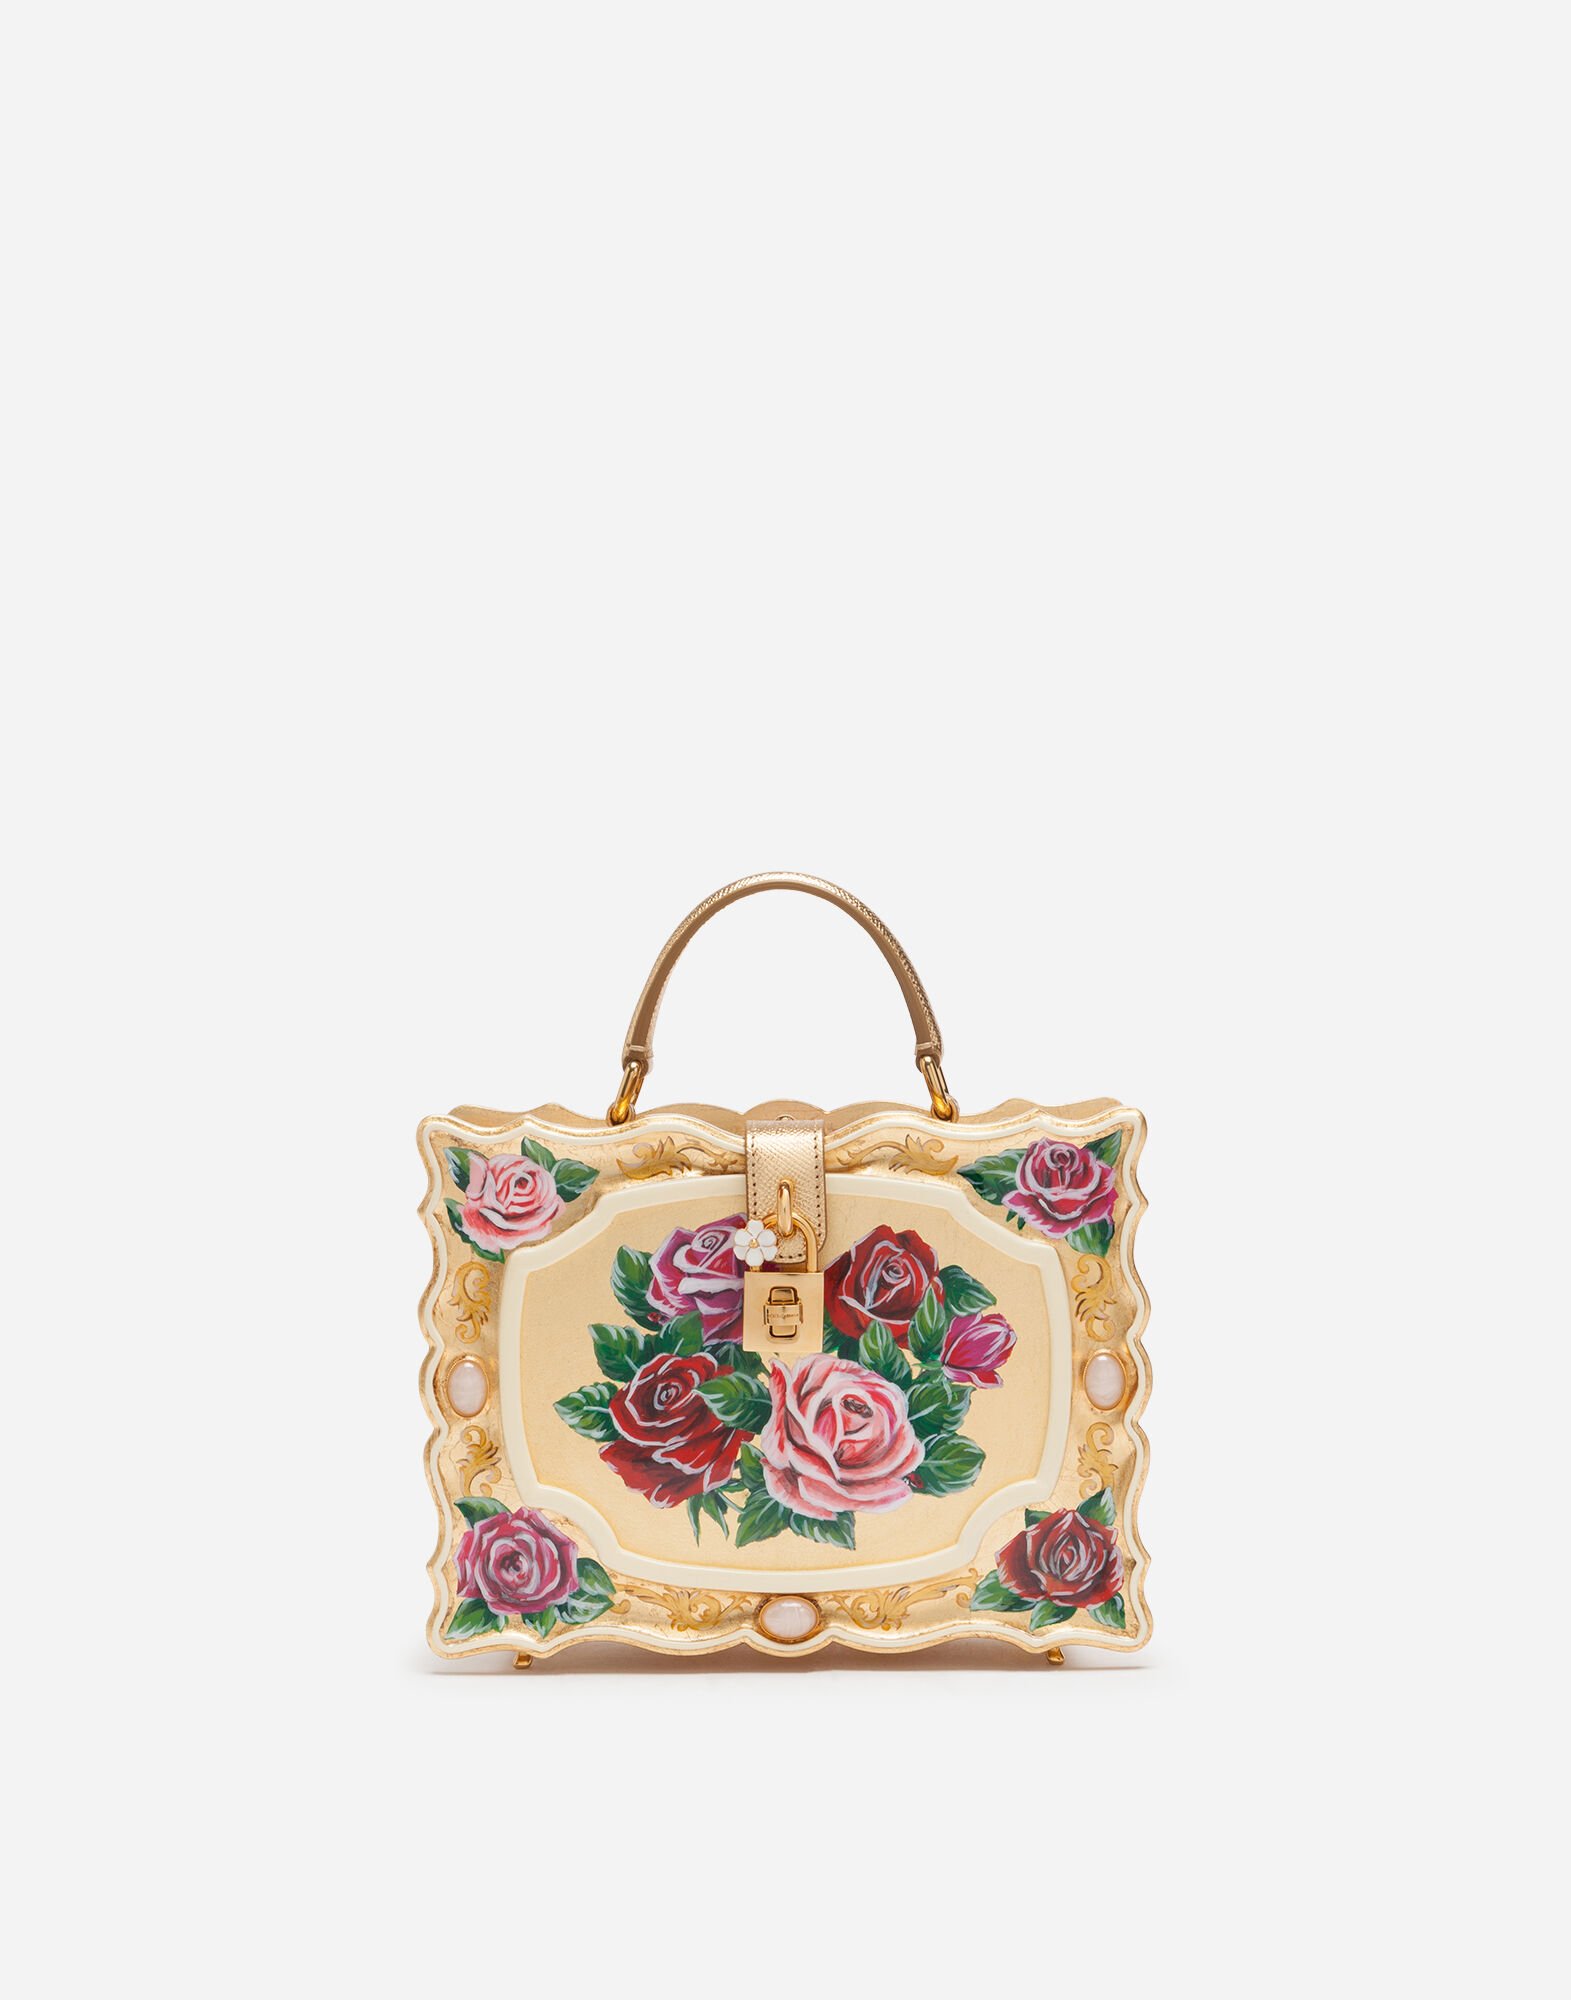 Dolce & Gabbana Dolce Box bag in golden hand-painted wood Floral Print BB5970AK033